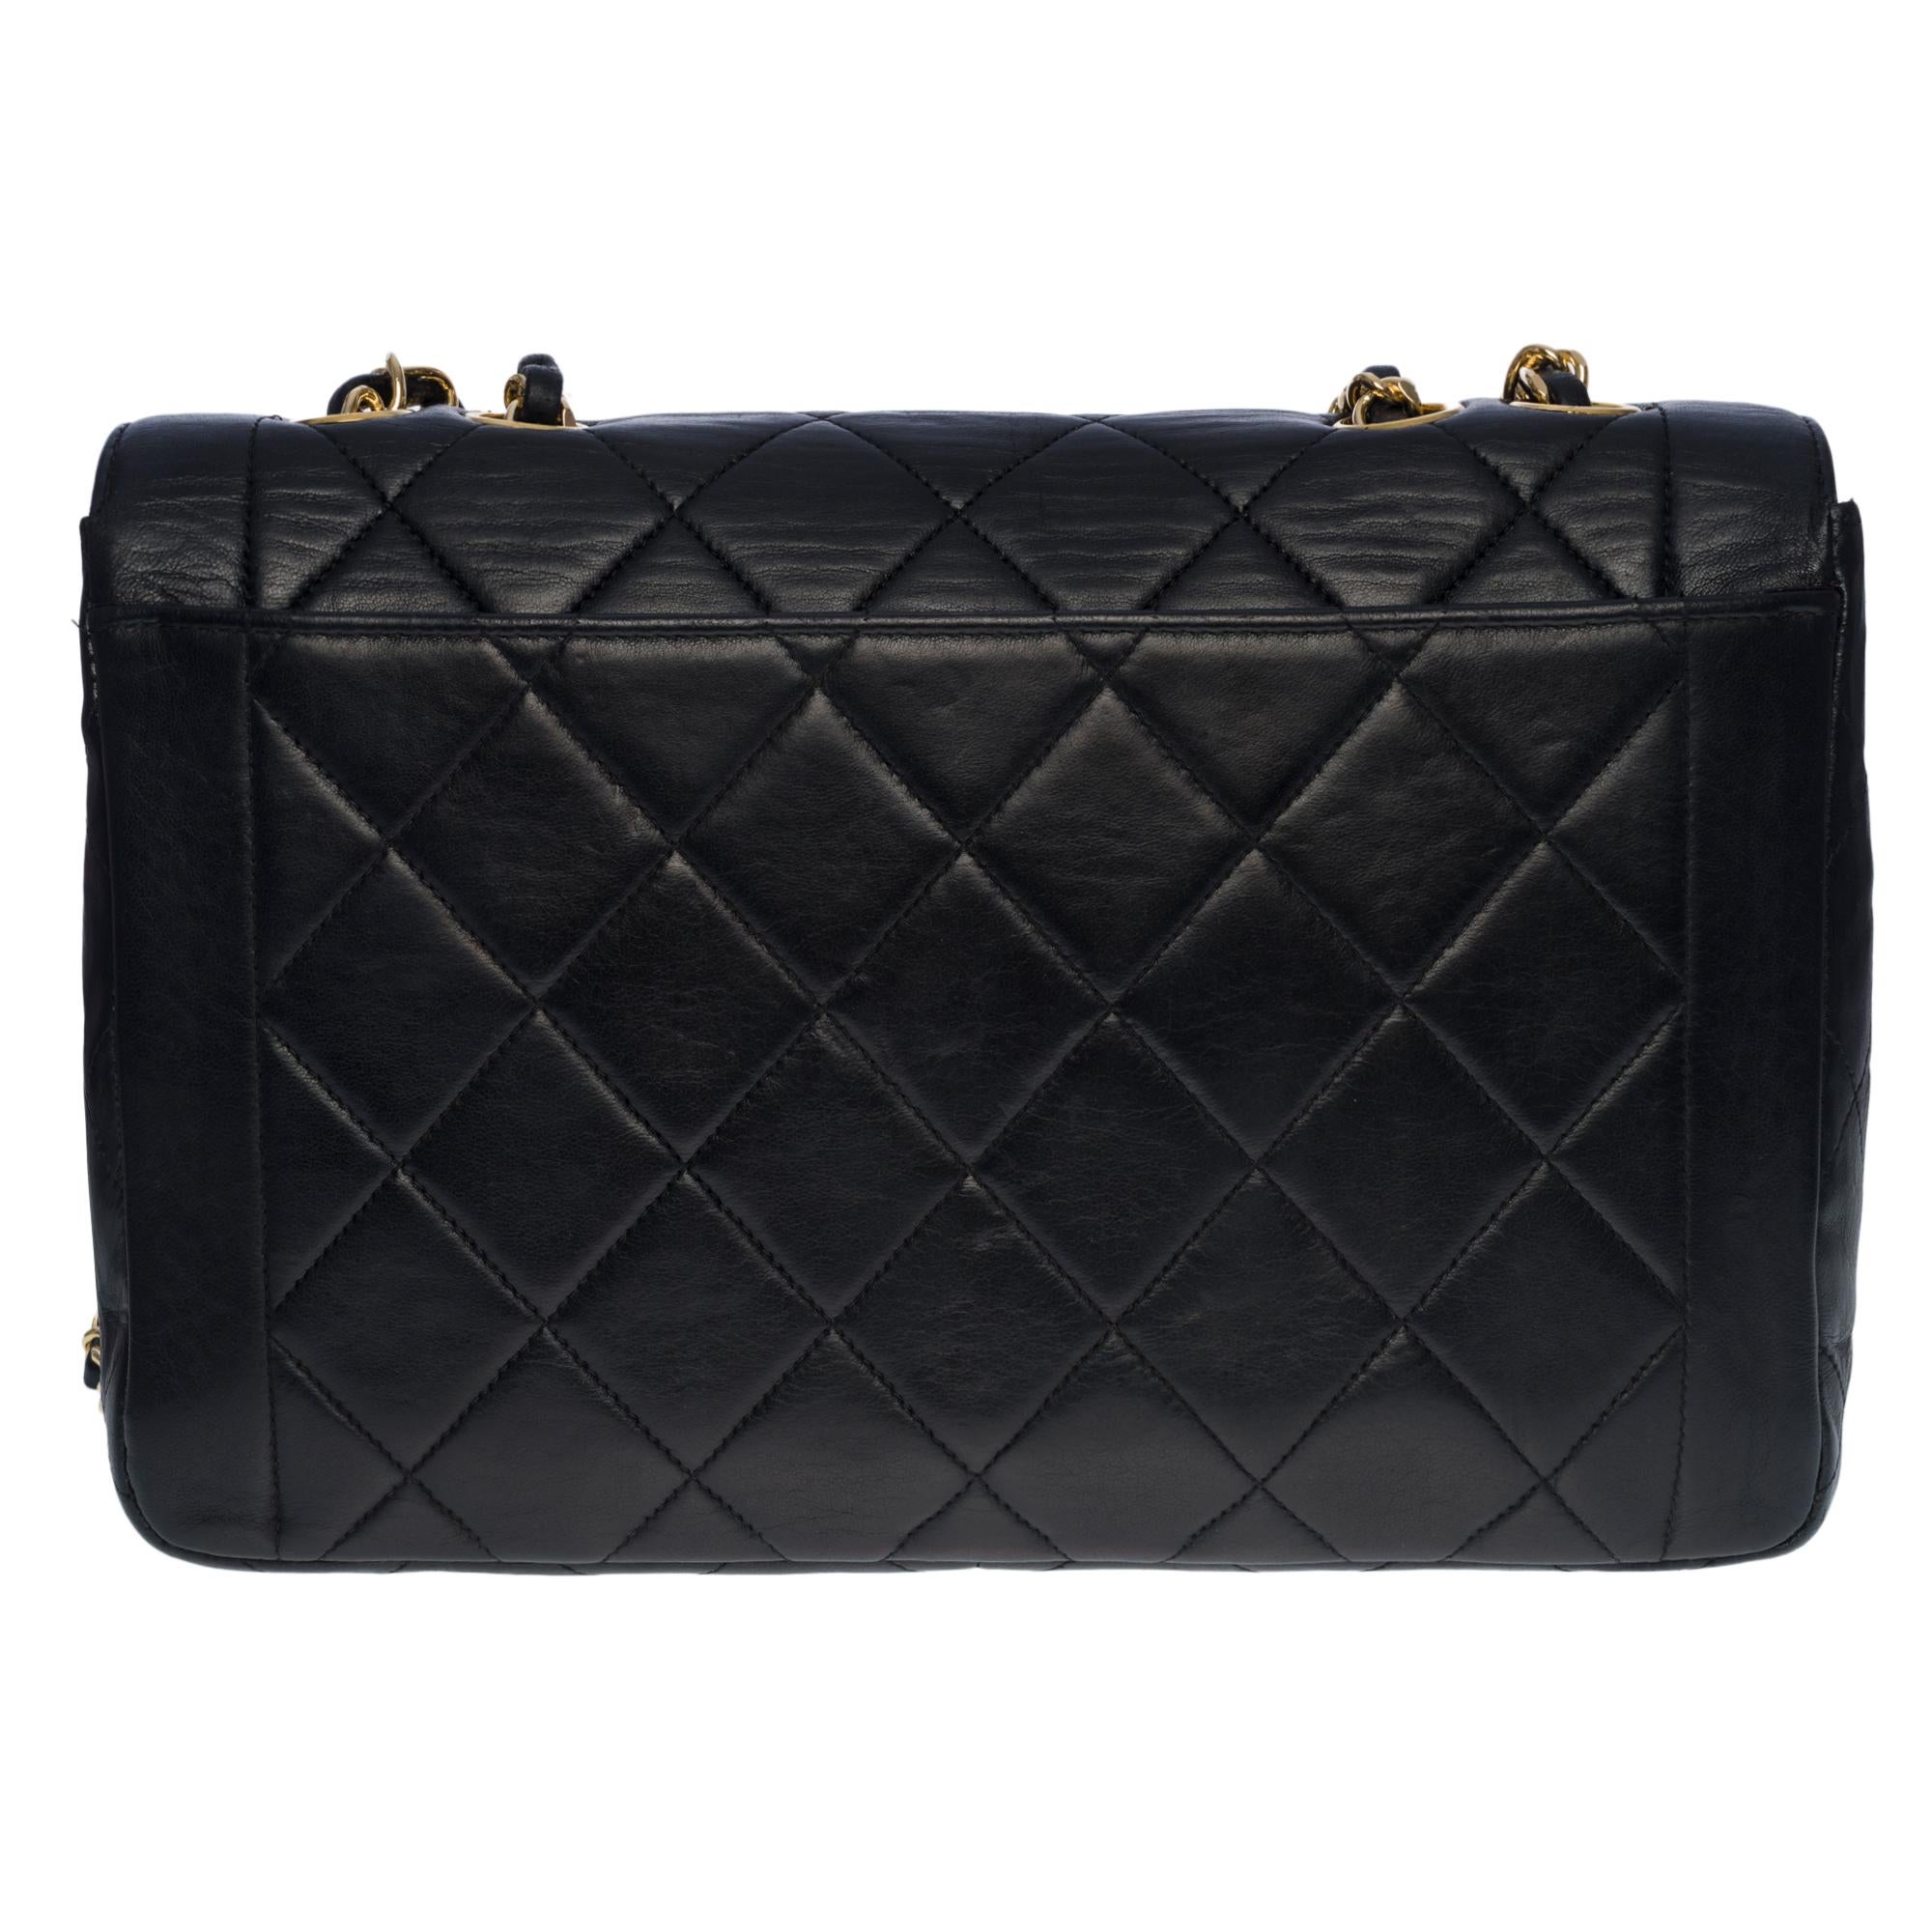 Superb Chanel Classic Flap Bag Medium in black quilted lambskin leather, gold-plated hardware, a gold-plated chain handle interwoven with black leather allowing for a shoulder and shoulder strap

Backpack pocket
Flap closure, gold CC logo